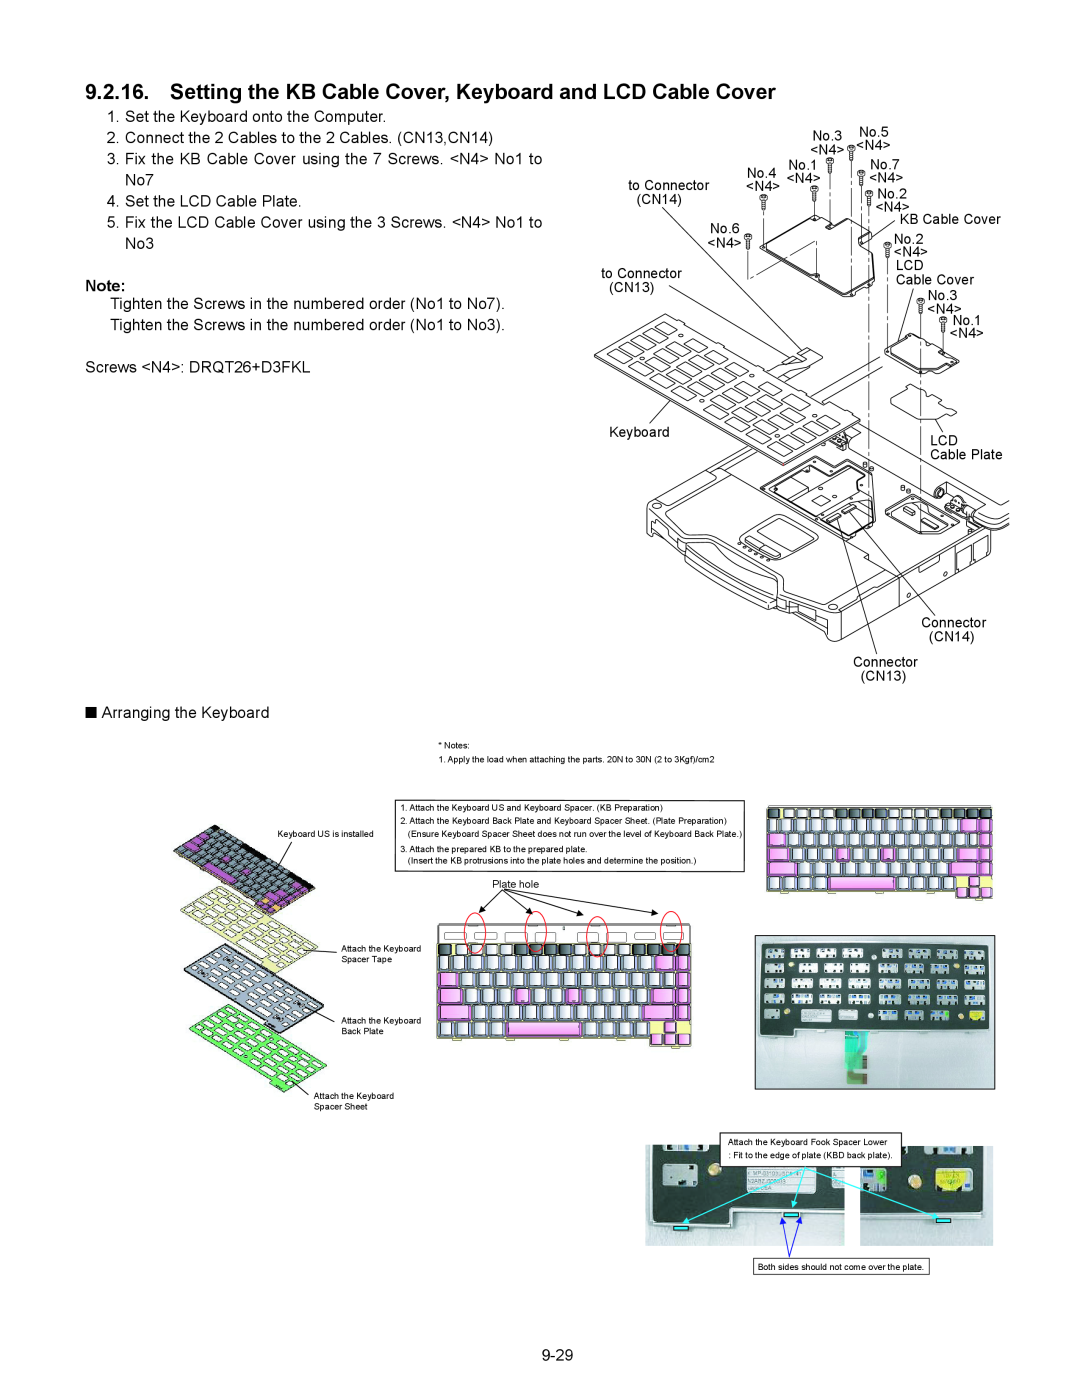 Matsushita CF-30 service manual Setting the KB Cable Cover, Keyboard and LCD Cable Cover, to Connector 